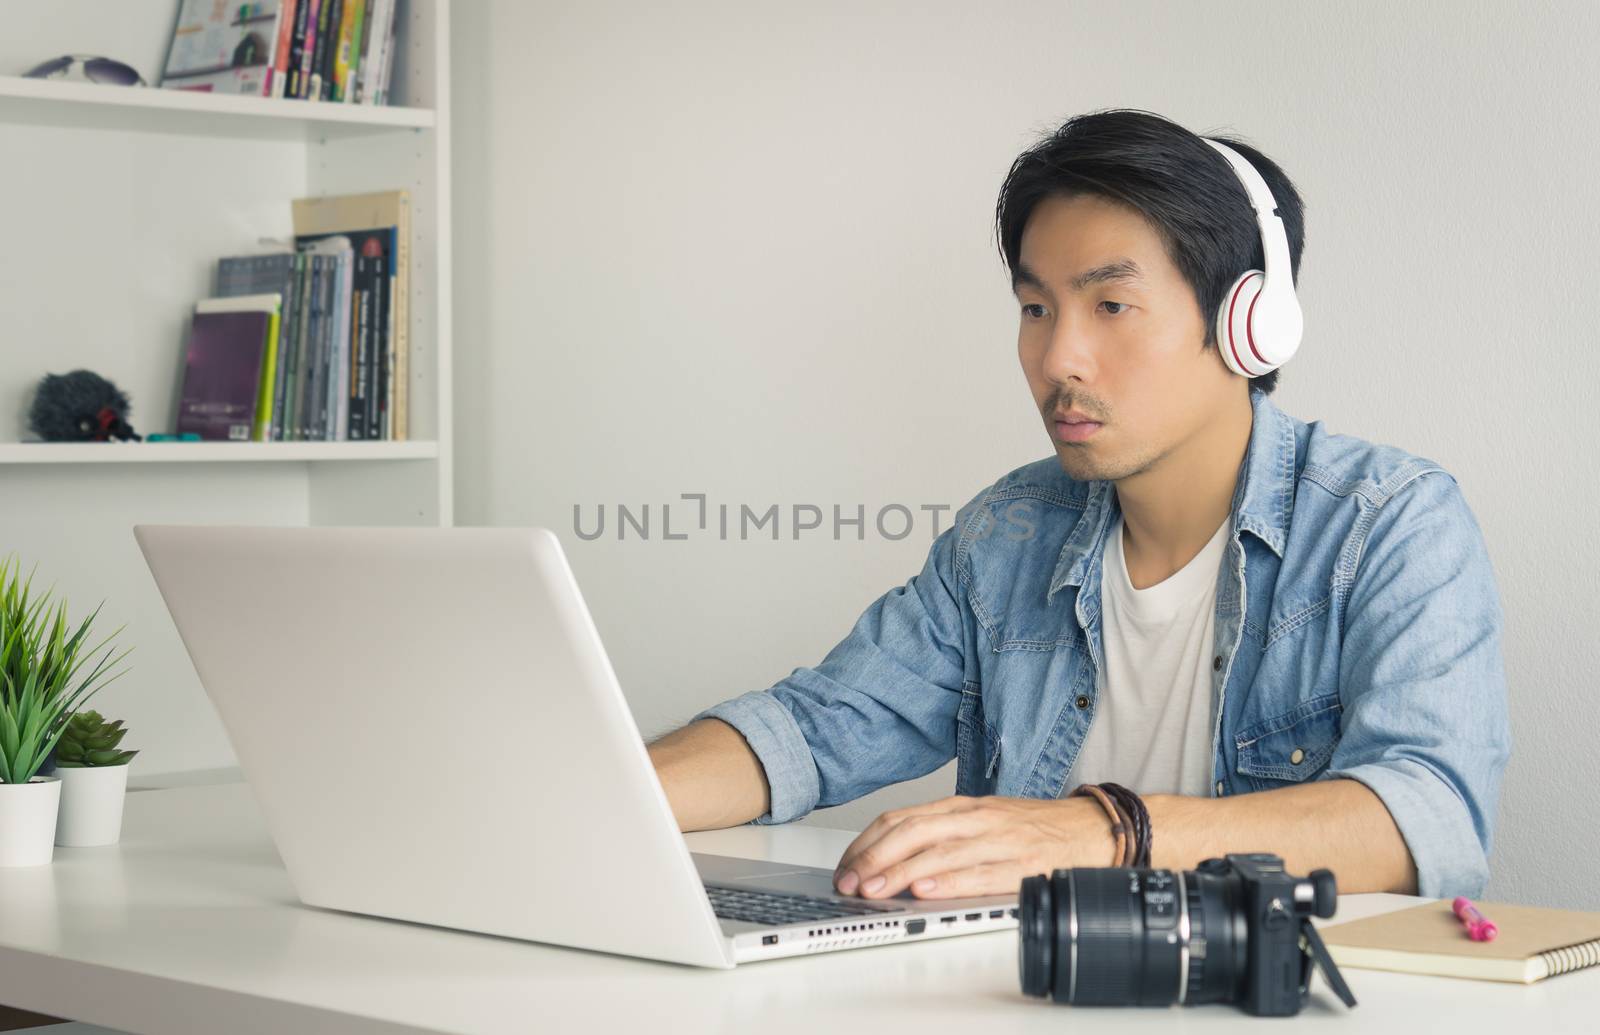 Asian Freelance Videographer in Denim or Jeans Shirt Checking Multimedia Sound by Laptop in Home Office. Freelance Videographer working with technology